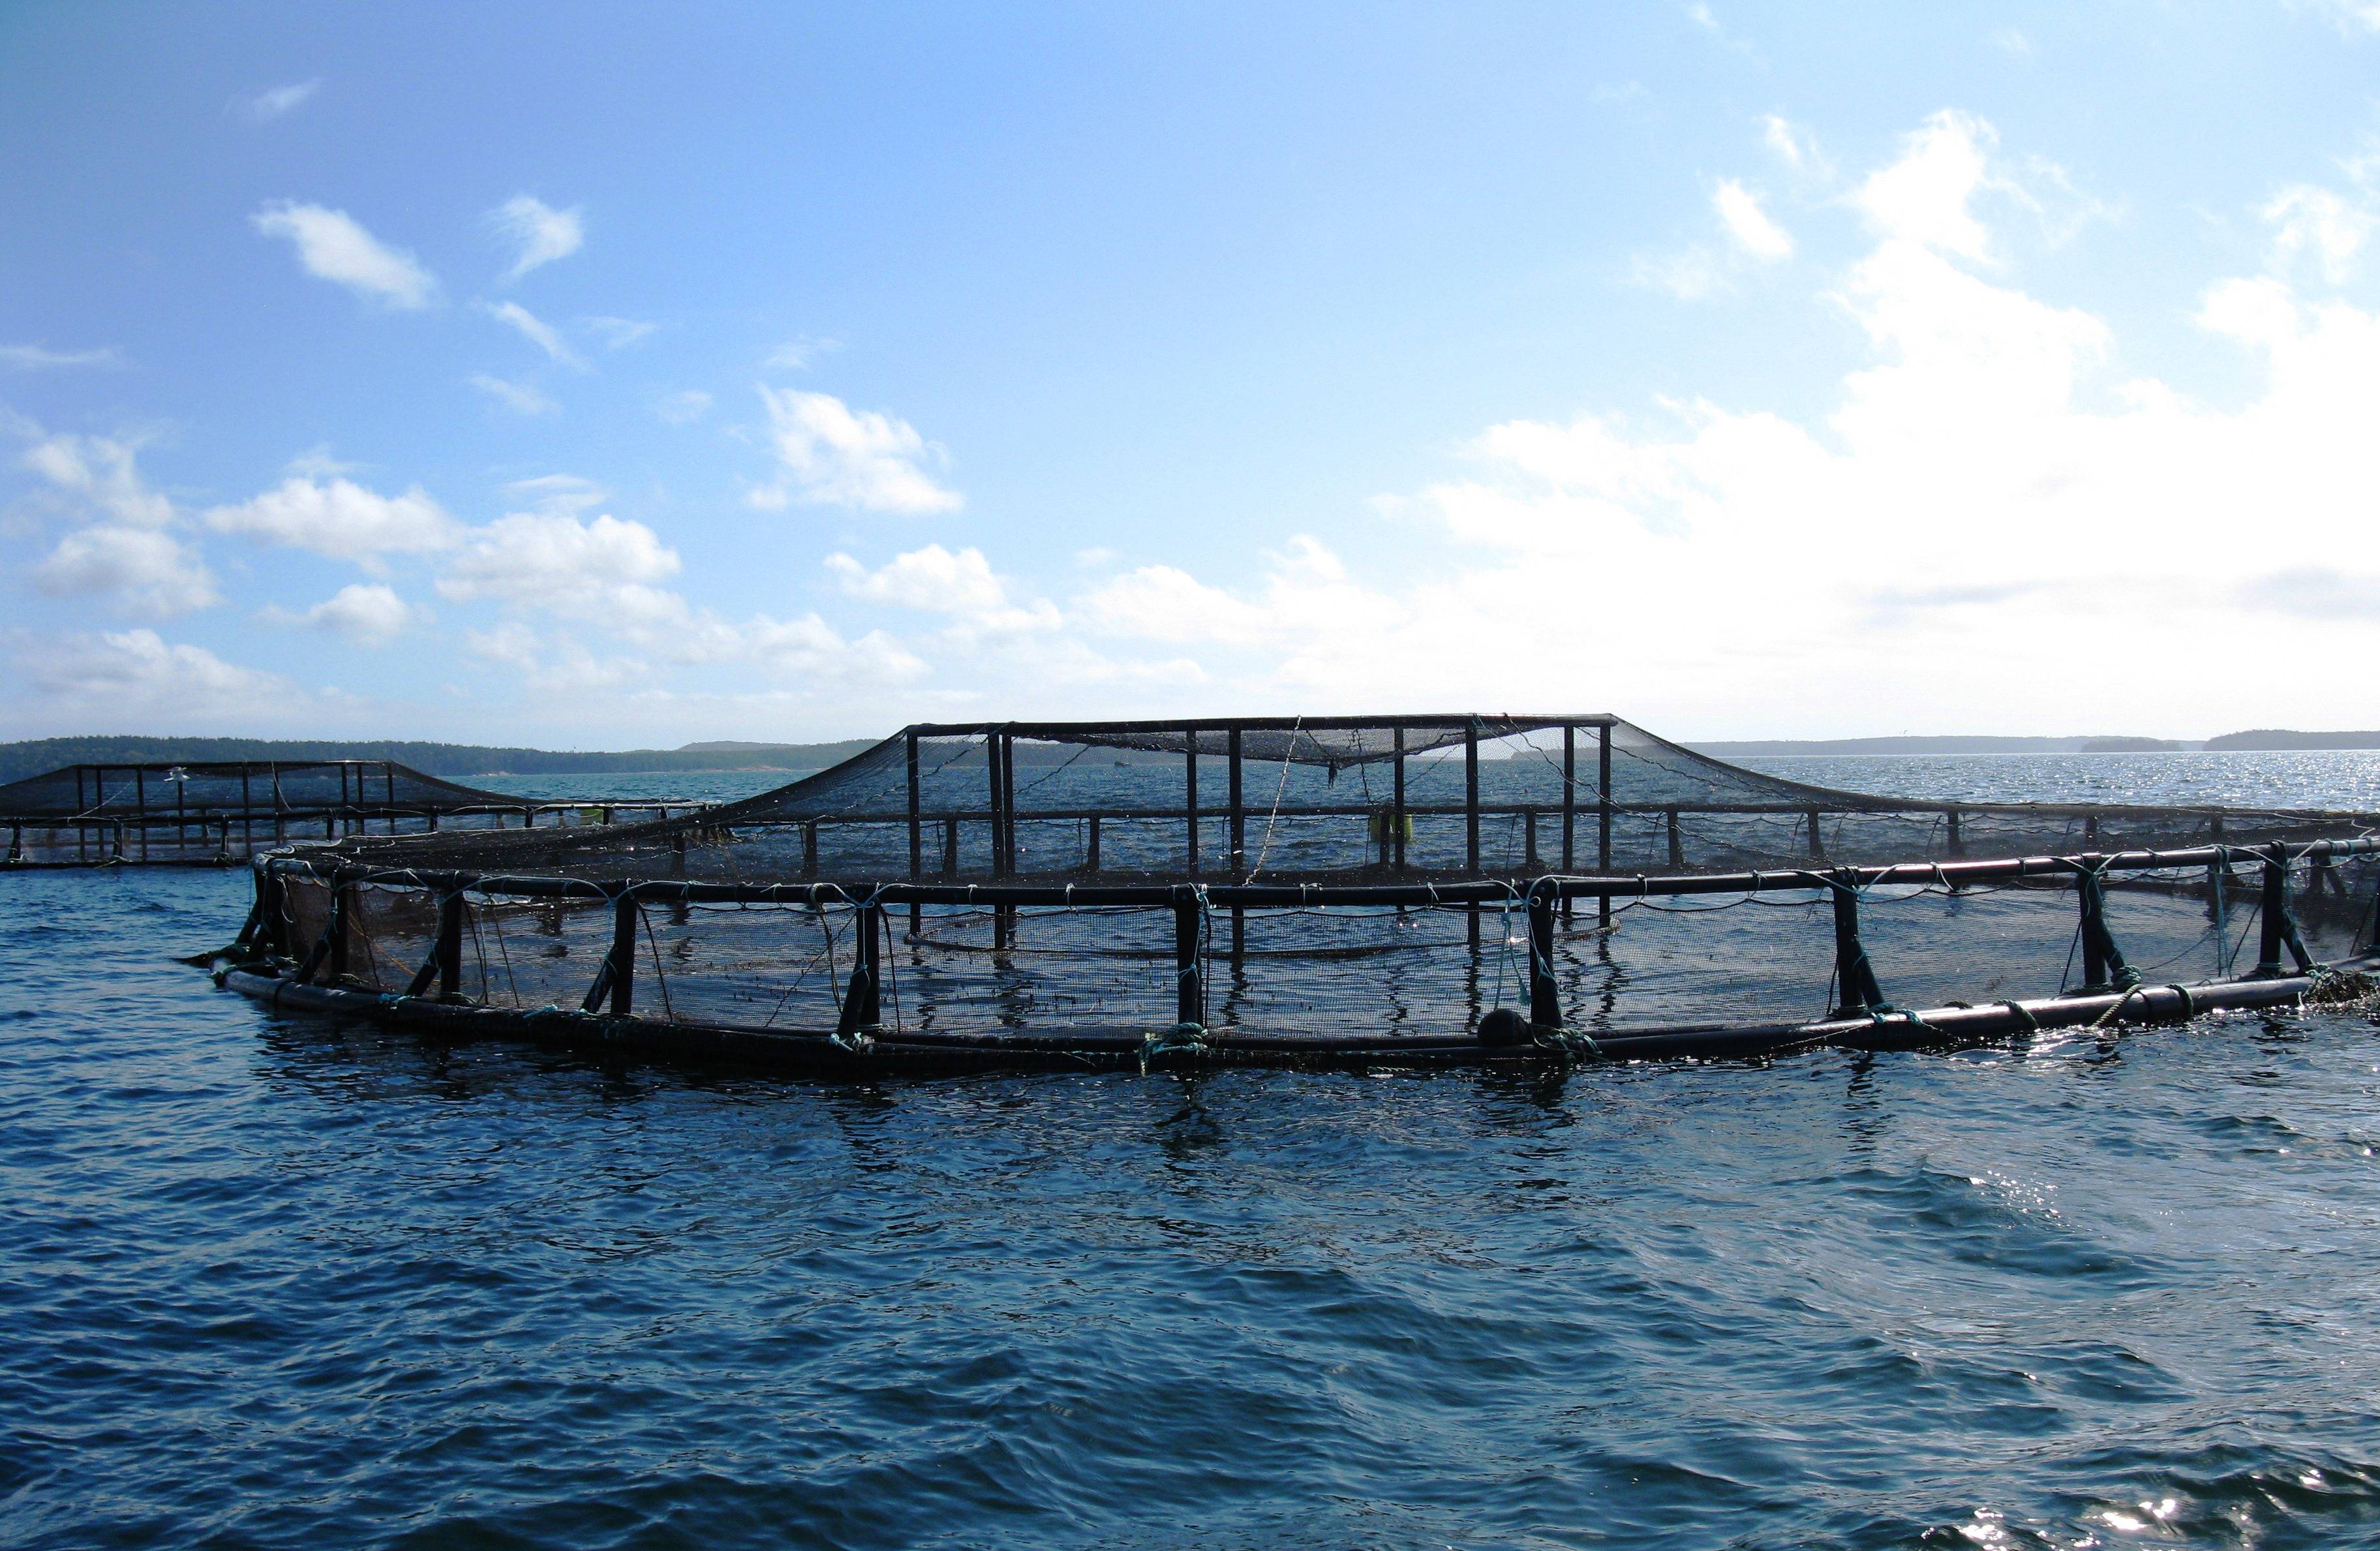 Climate Change, Population Growth May Lead to Open Ocean Aquaculture